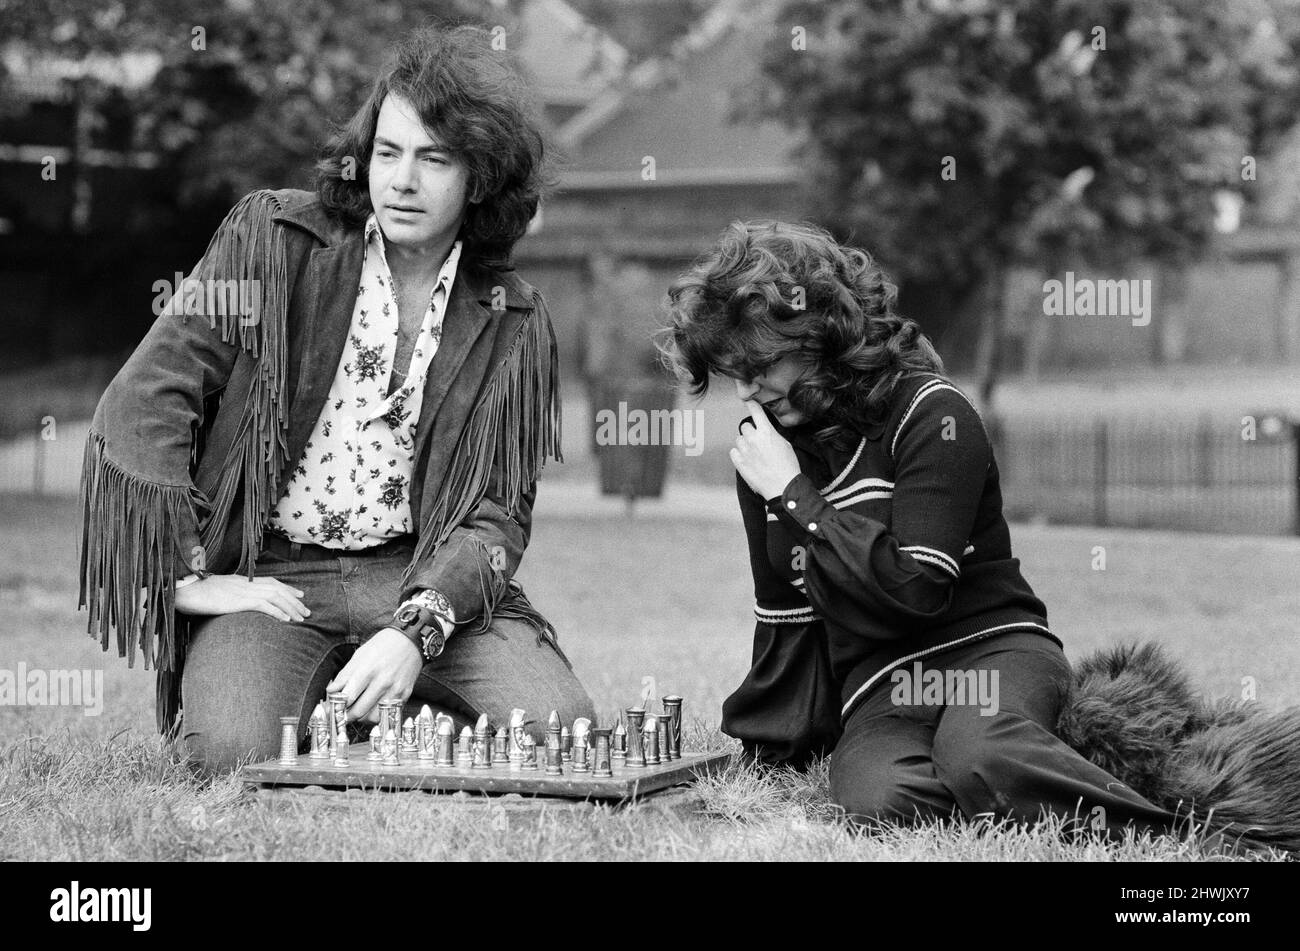 Neil Diamond, top American singer songwriter is in Britain for a month long European tour which opens this Saturday (27th May) at London's Royal Albert Hall. Pictured, he is presented with a chess set by his fan club and played with Joy Anderson in Kensington Gardens. 25th May 1972. Stock Photo